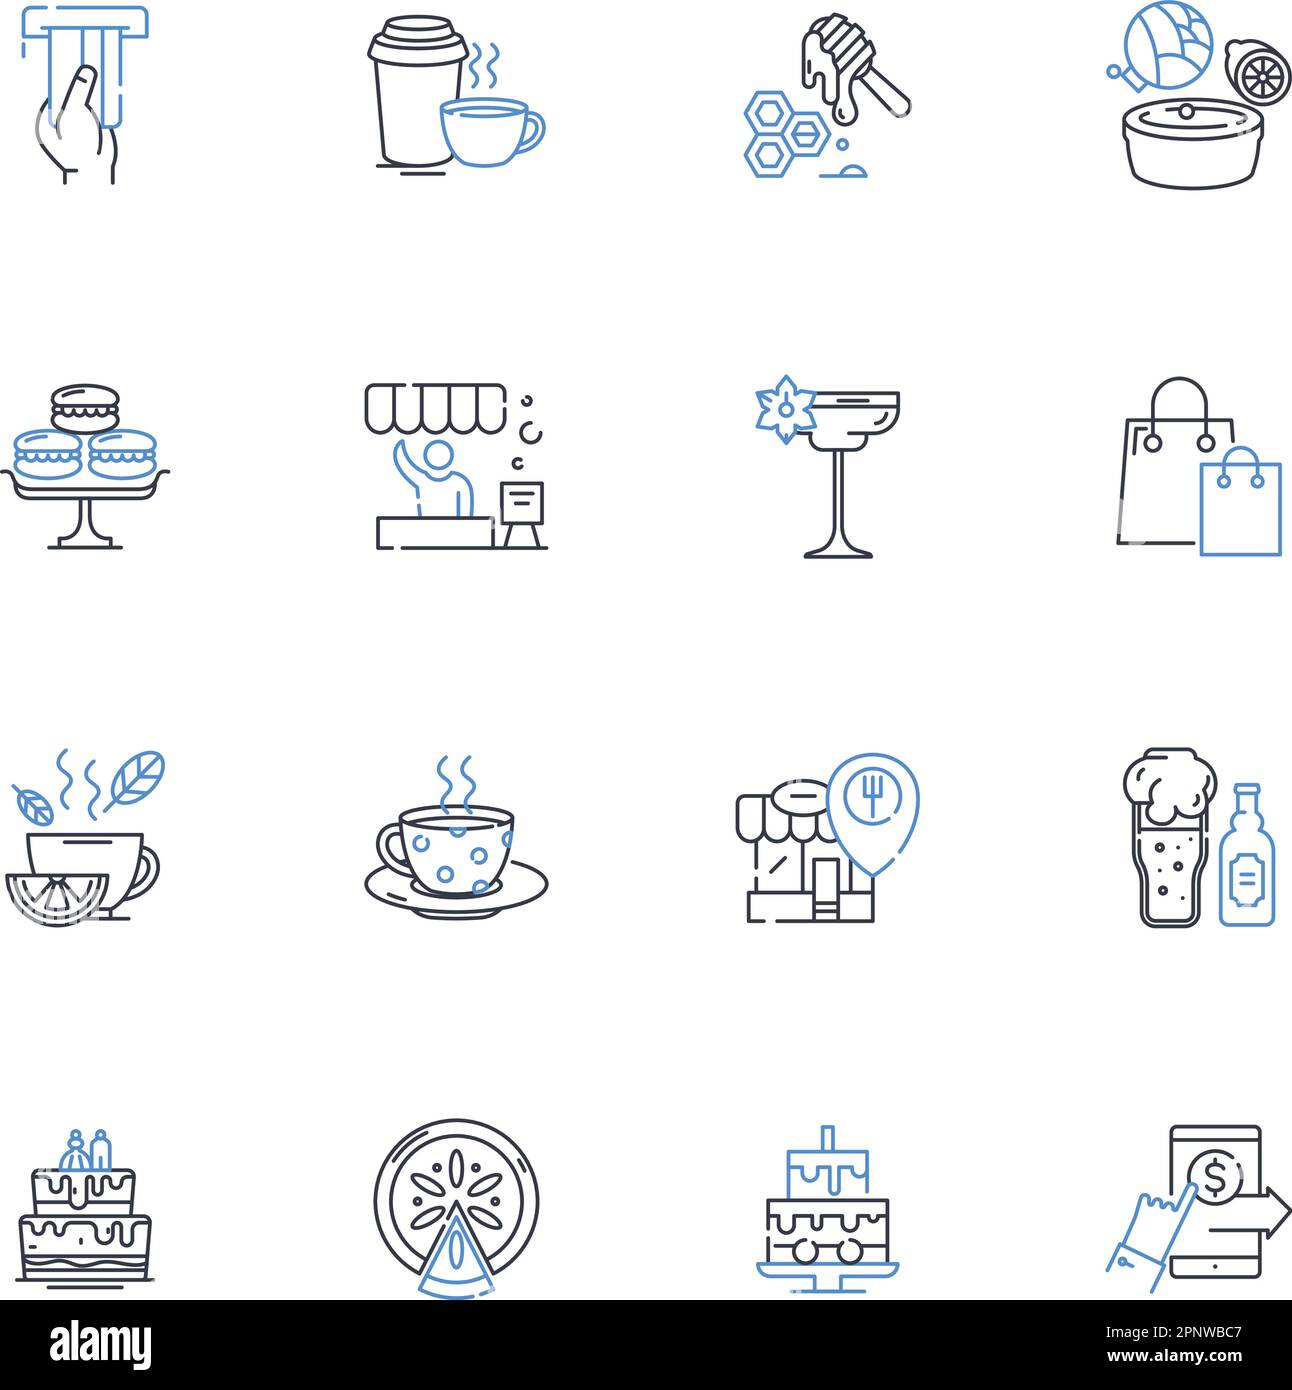 Ice cream parlor line icons collection. Scoops, Gelato, Waffle cs, Sorbet, Soft serve, Sundae, Toppings vector and linear illustration. Fudge Stock Vector